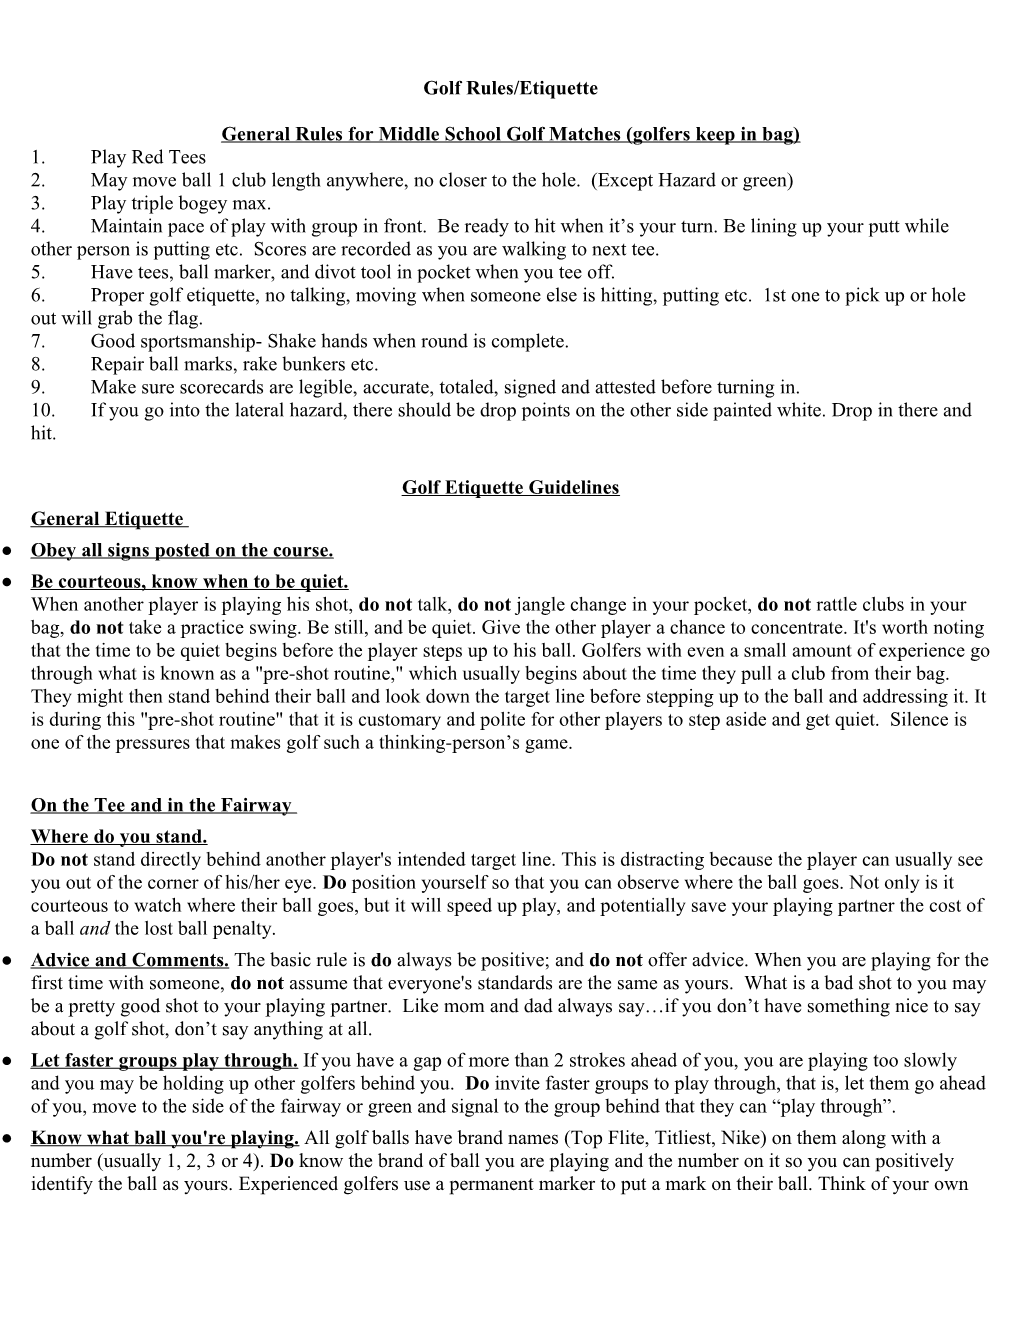 General Rules for Middle School Golf Matches (Golfers Keep in Bag)